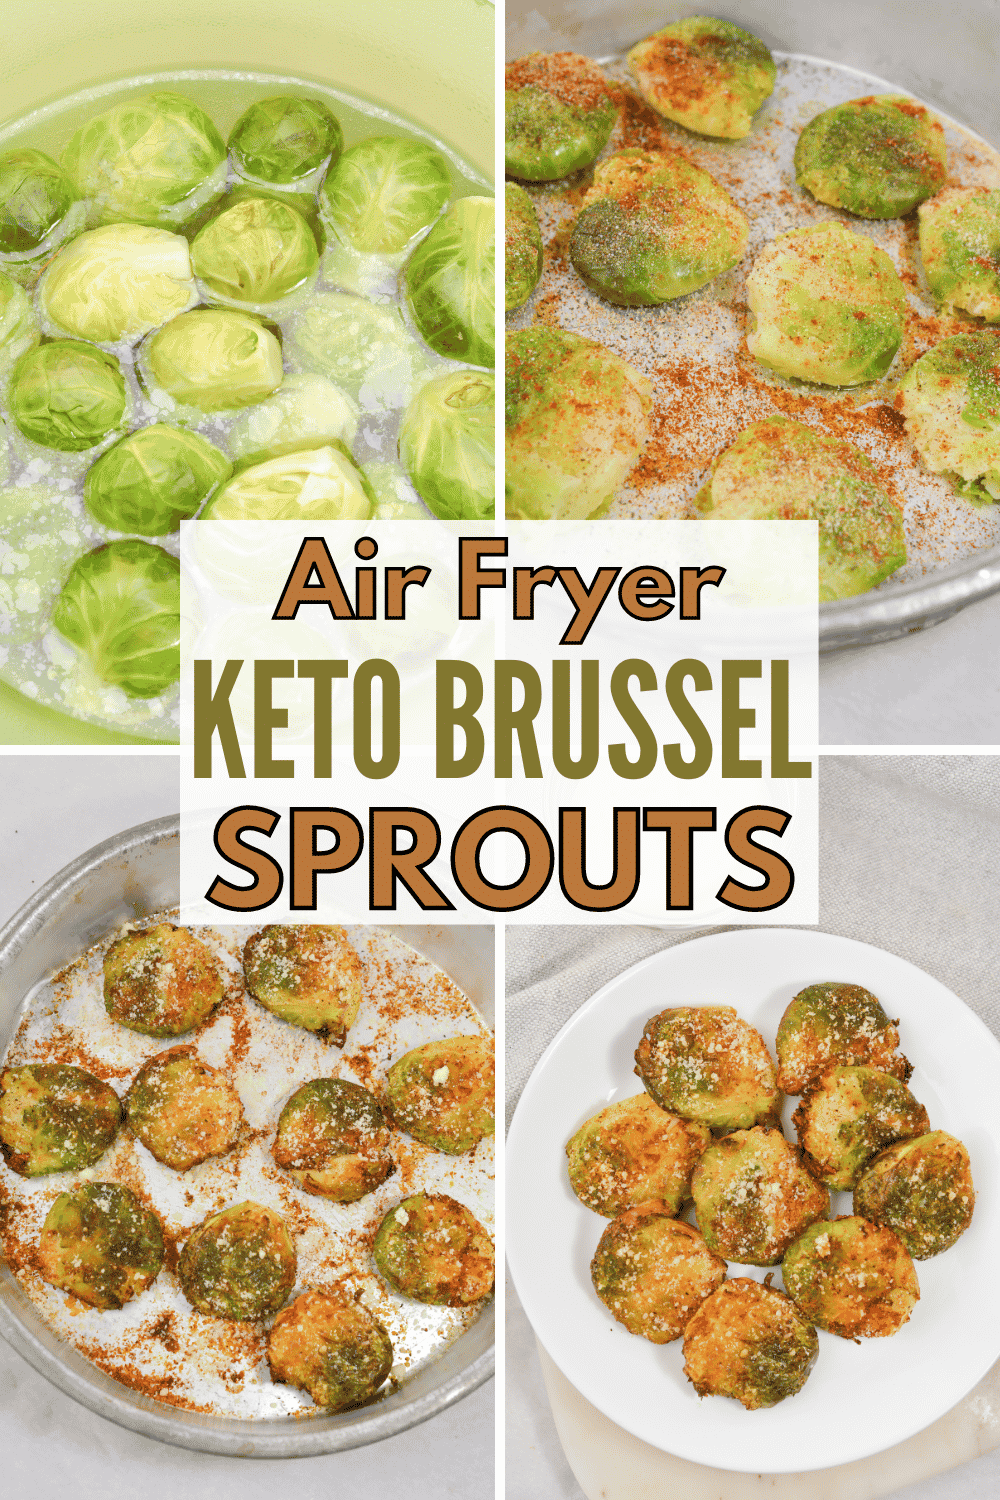 Air Fryer Keto Brussel Sprouts are a delicious and healthy low carb option. They're coated in a mixture of spices and air fried to perfection. #ketobrusselsprouts #airfryer #brusselsprouts #keto #recipe via @wondermomwannab